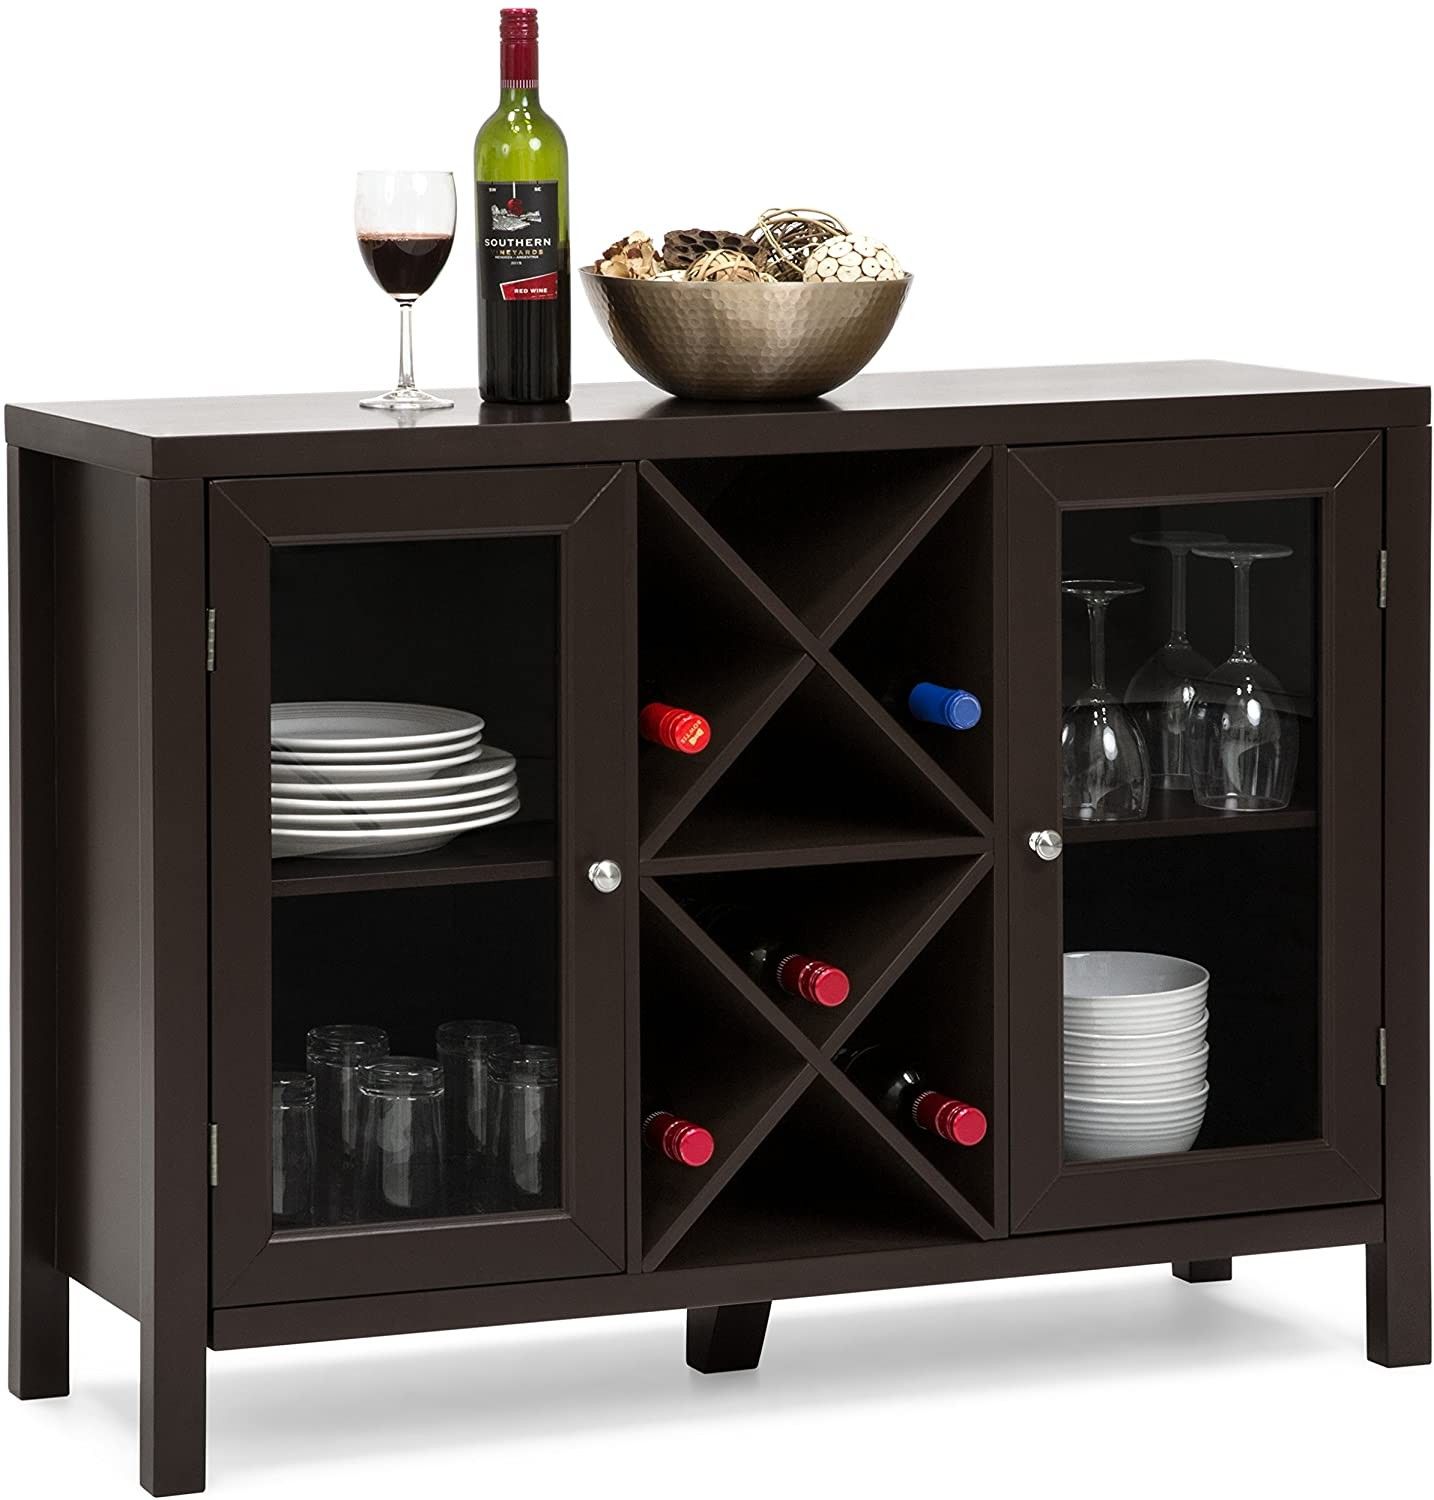 Stylish Rustic Table Cabinet with Wine Rack Sideboard, Espresso, Wooden